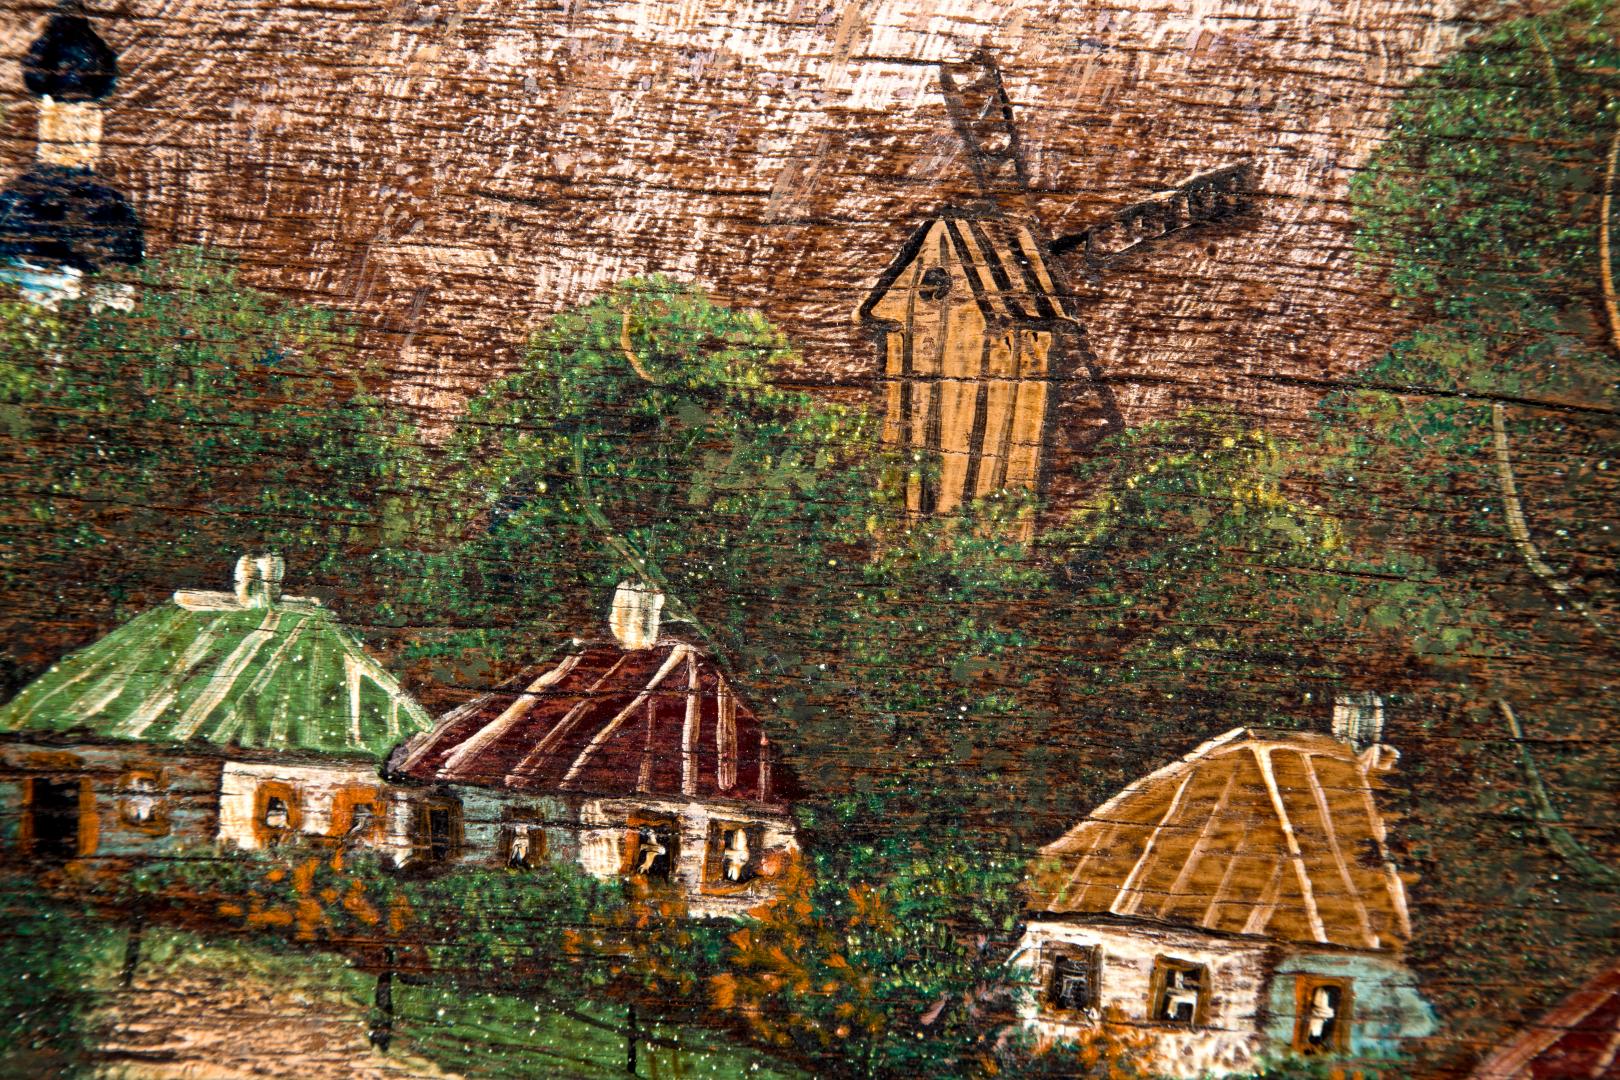 Landscape of the village with a church and a windmill